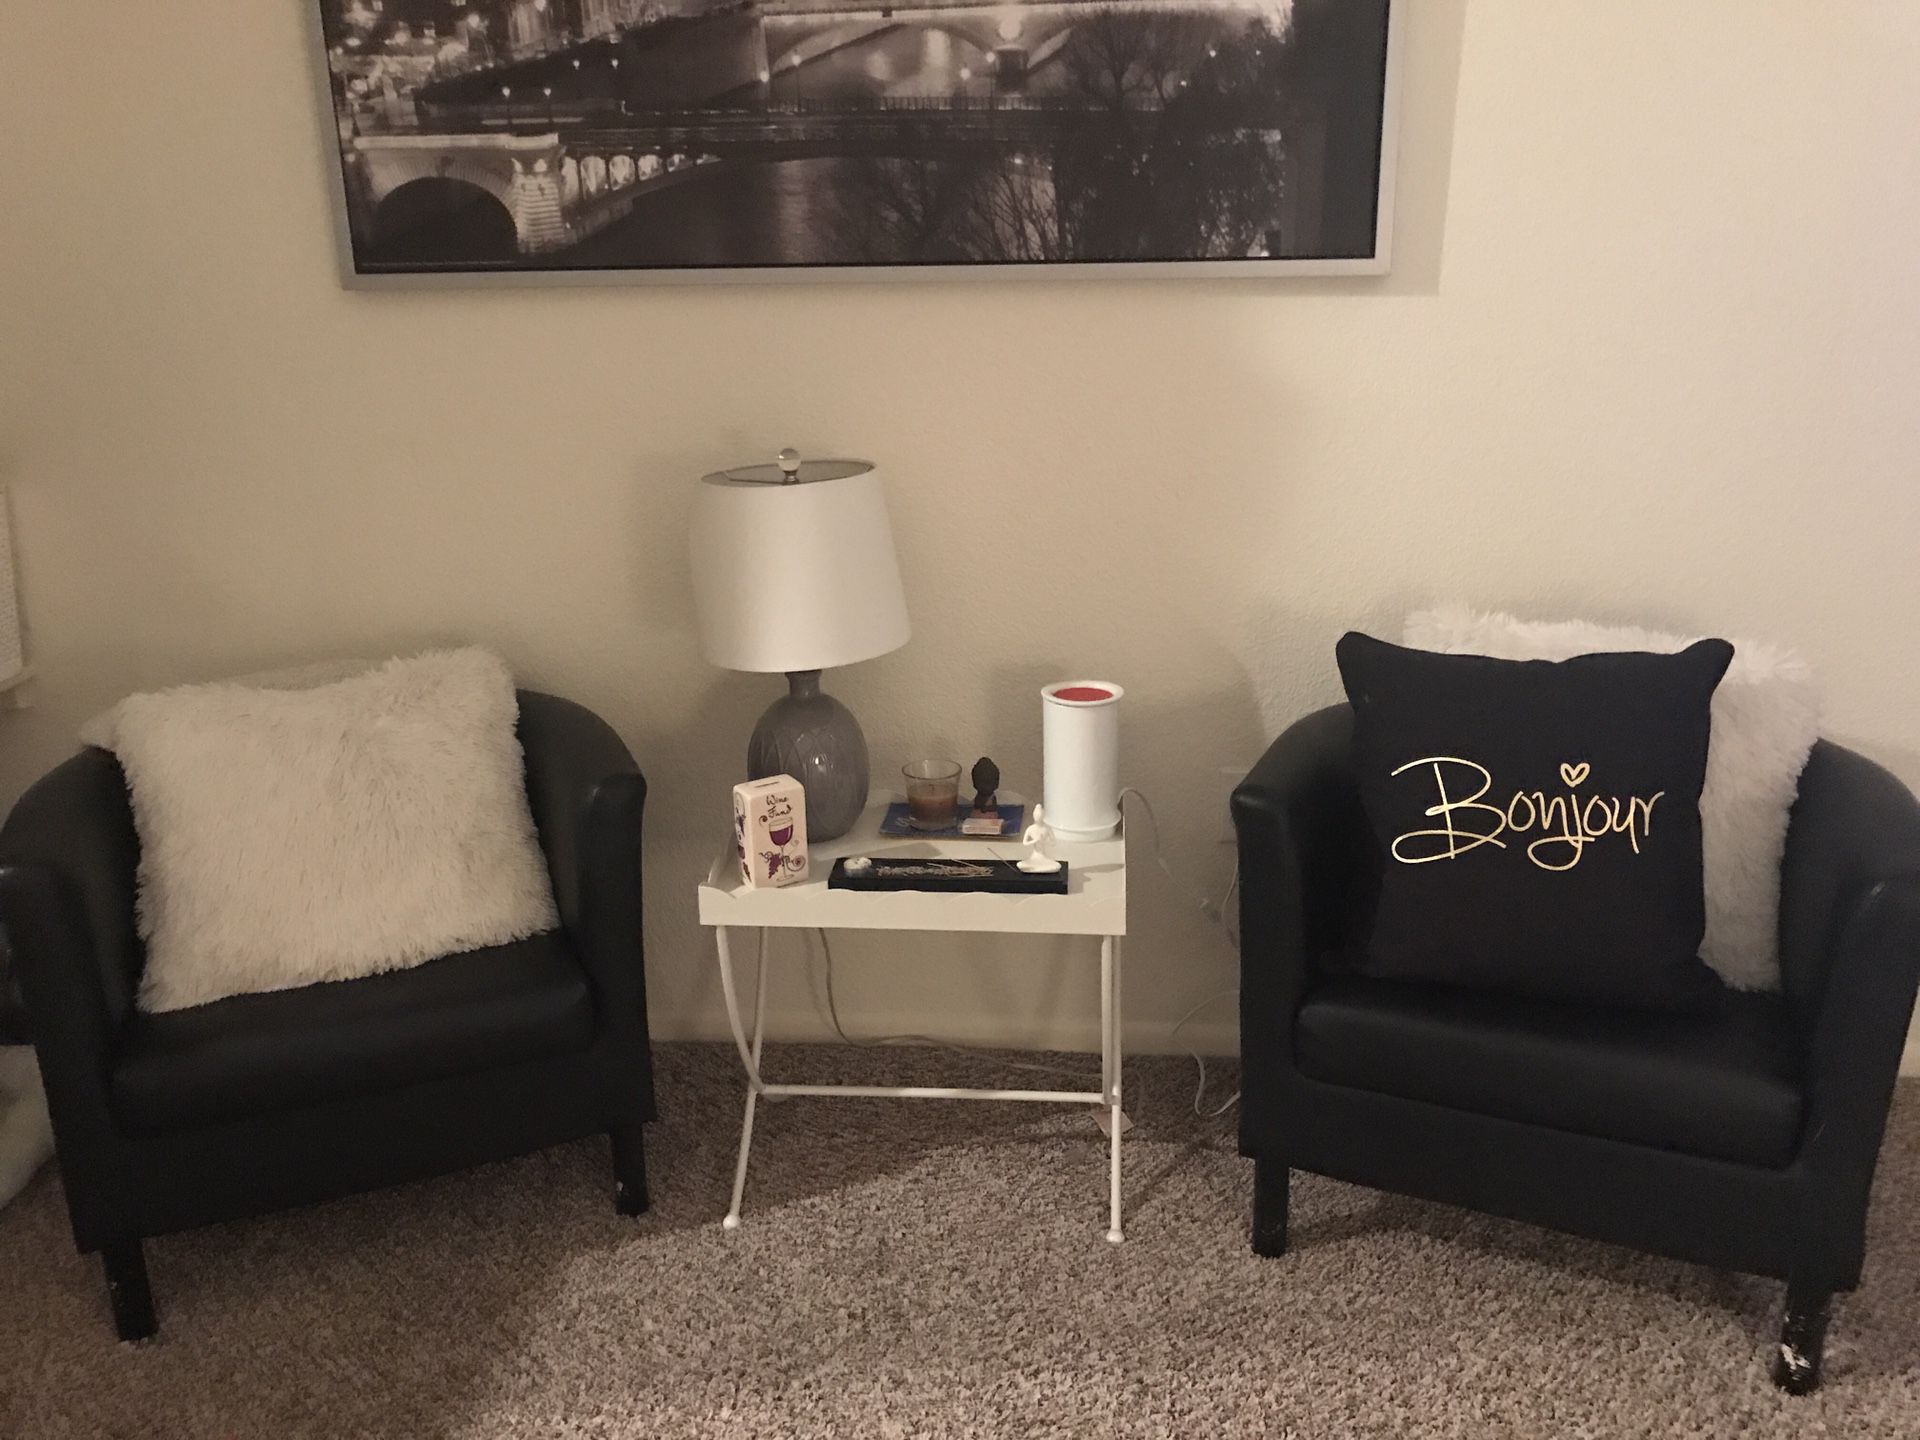 Black leather chairs ($40) and white metal stands ($100)